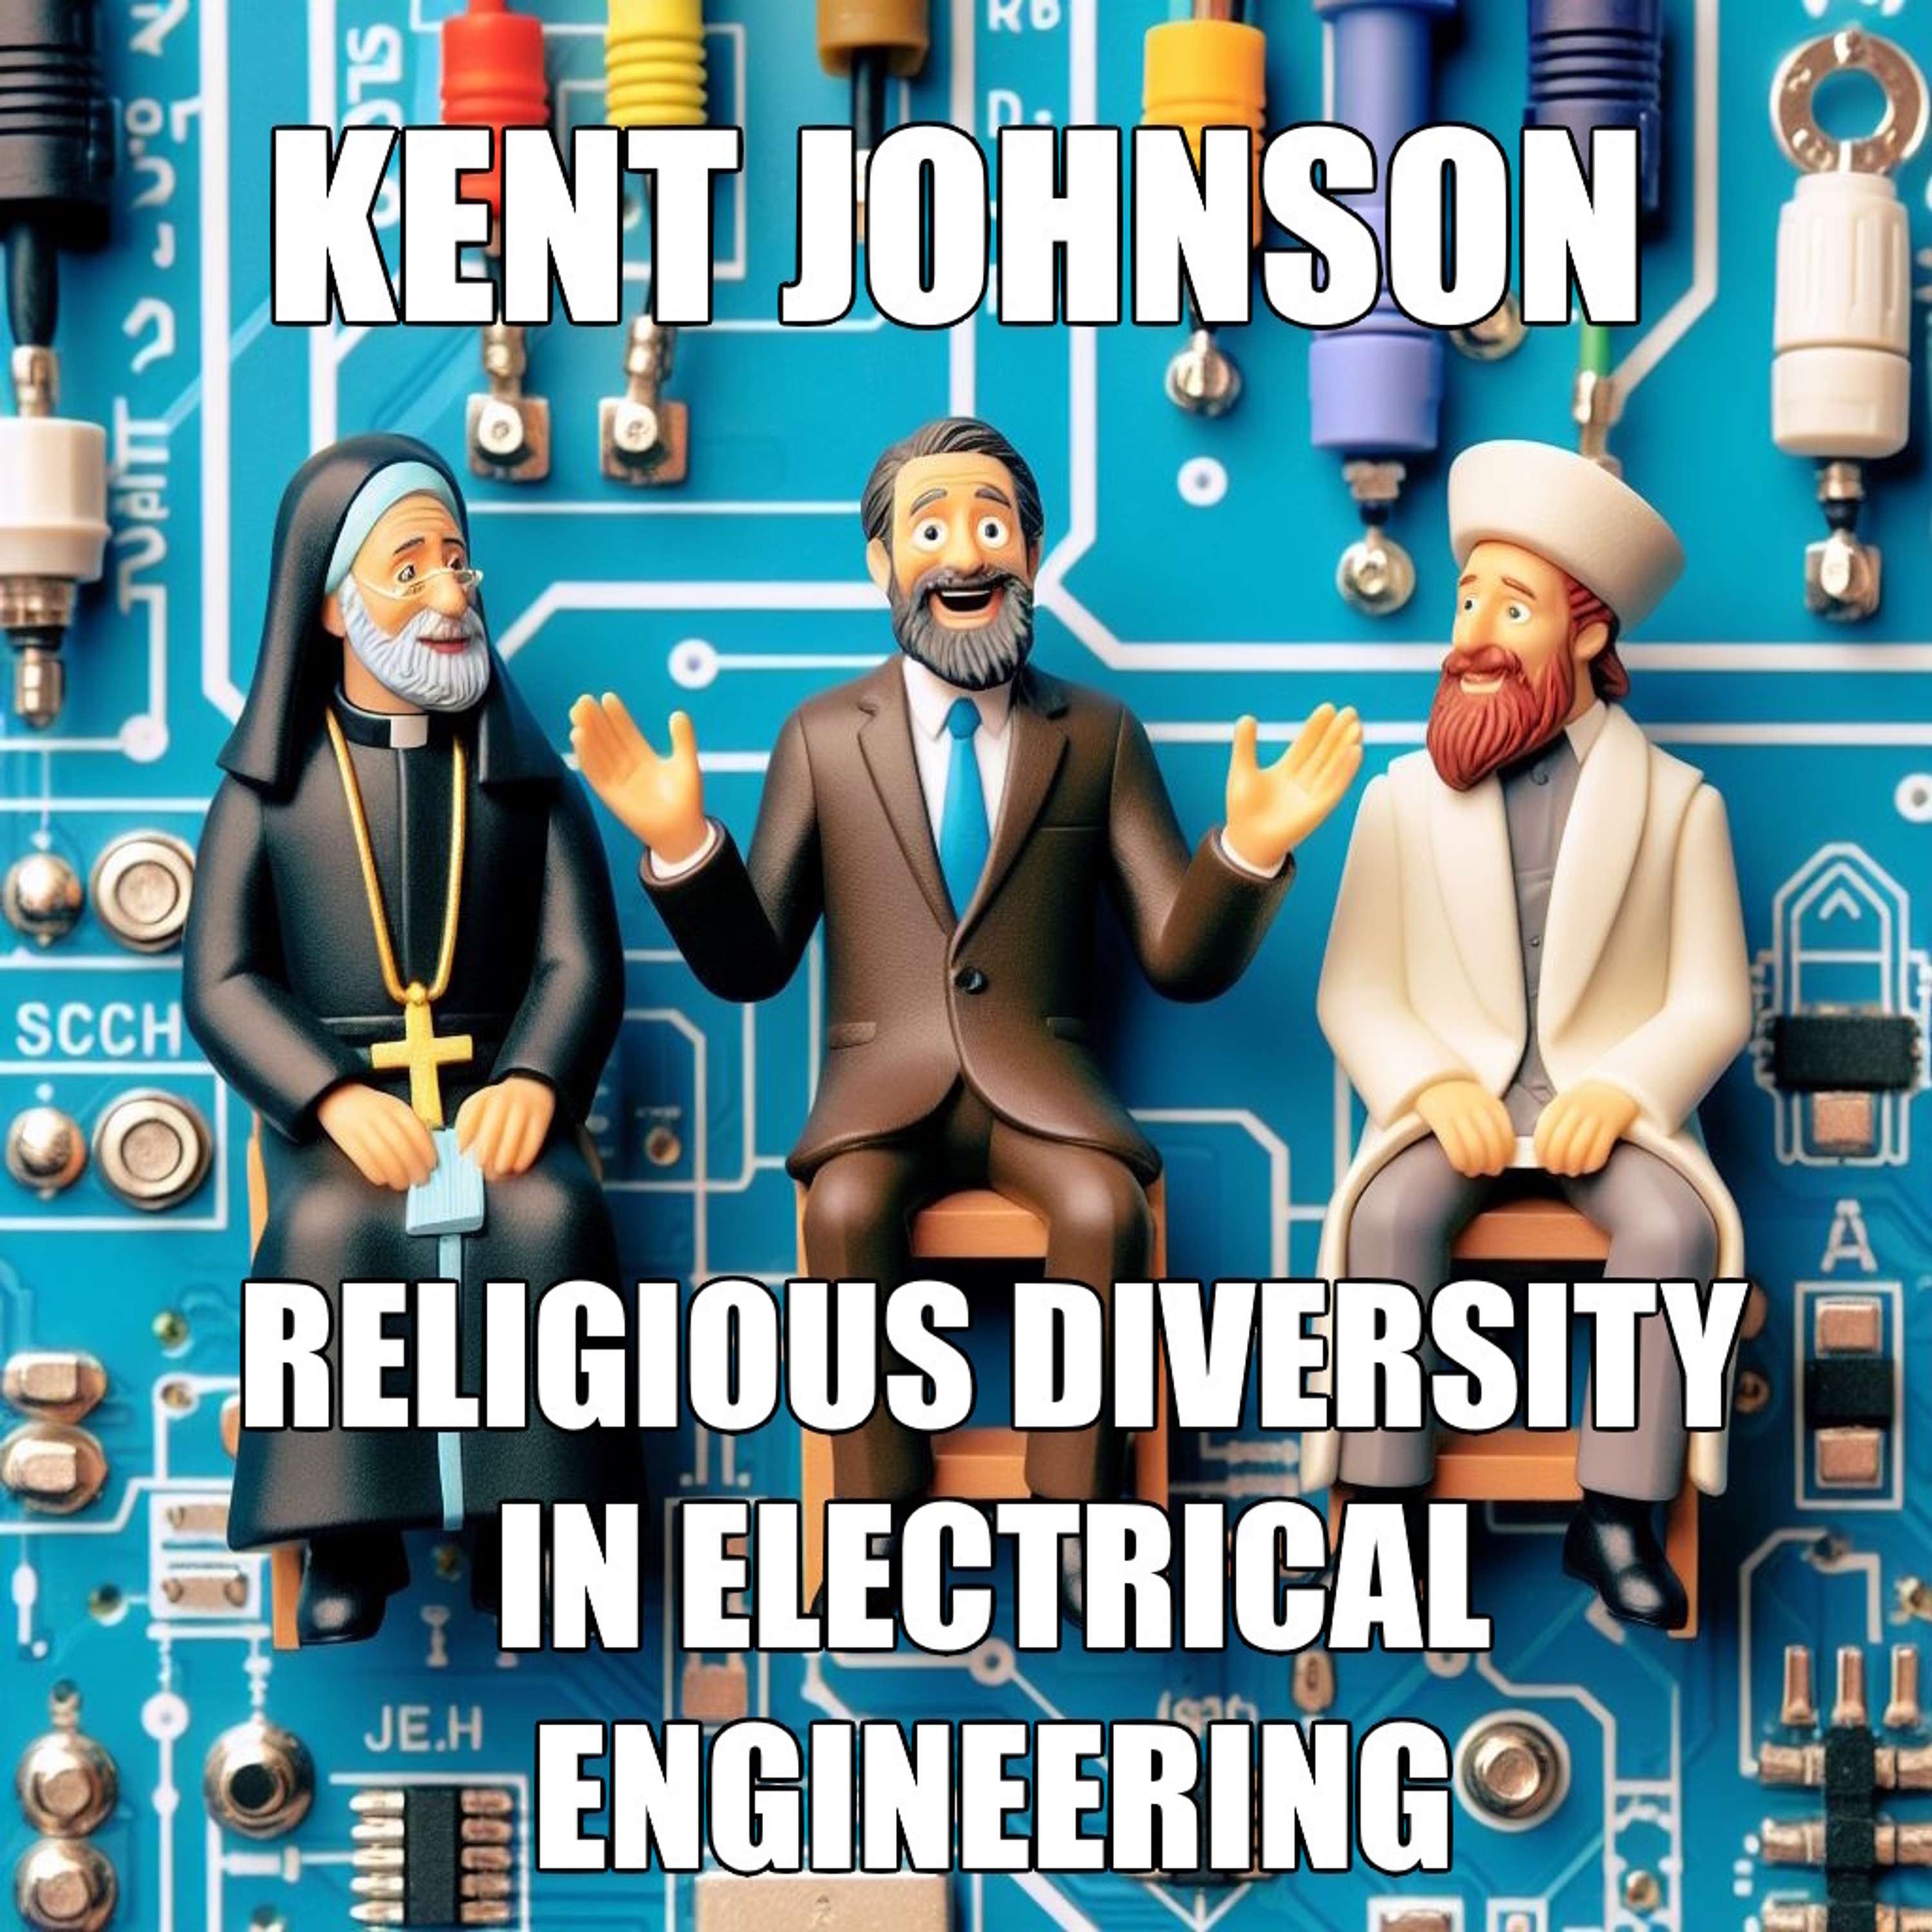 EP#419: Kent Johnson: Religious Diversity in Electrical Engineering